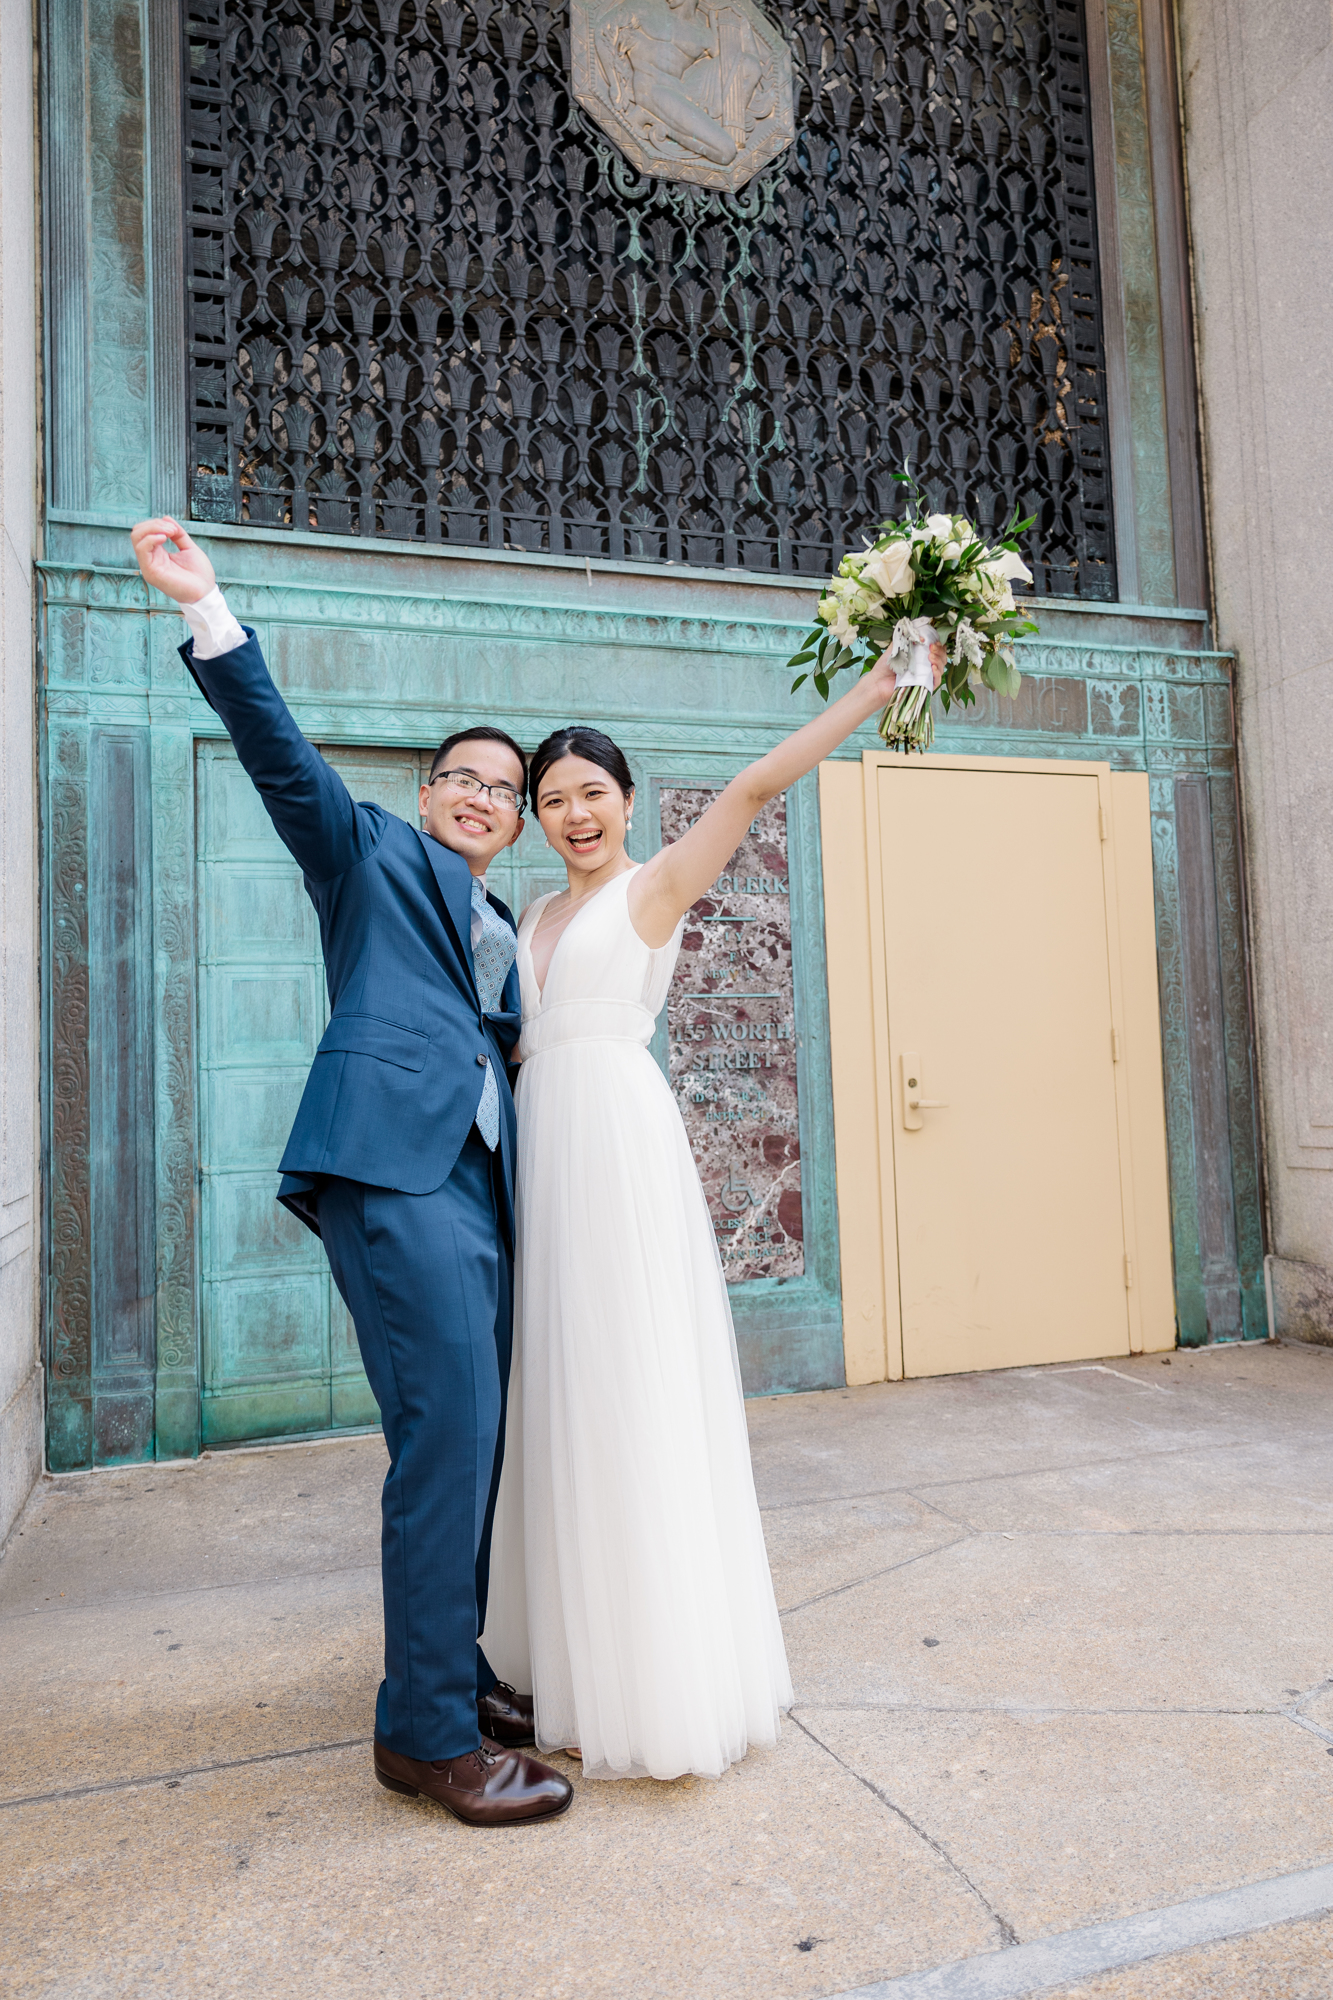 Stunning Photos of New York Elopement in DUMBO and Central Park